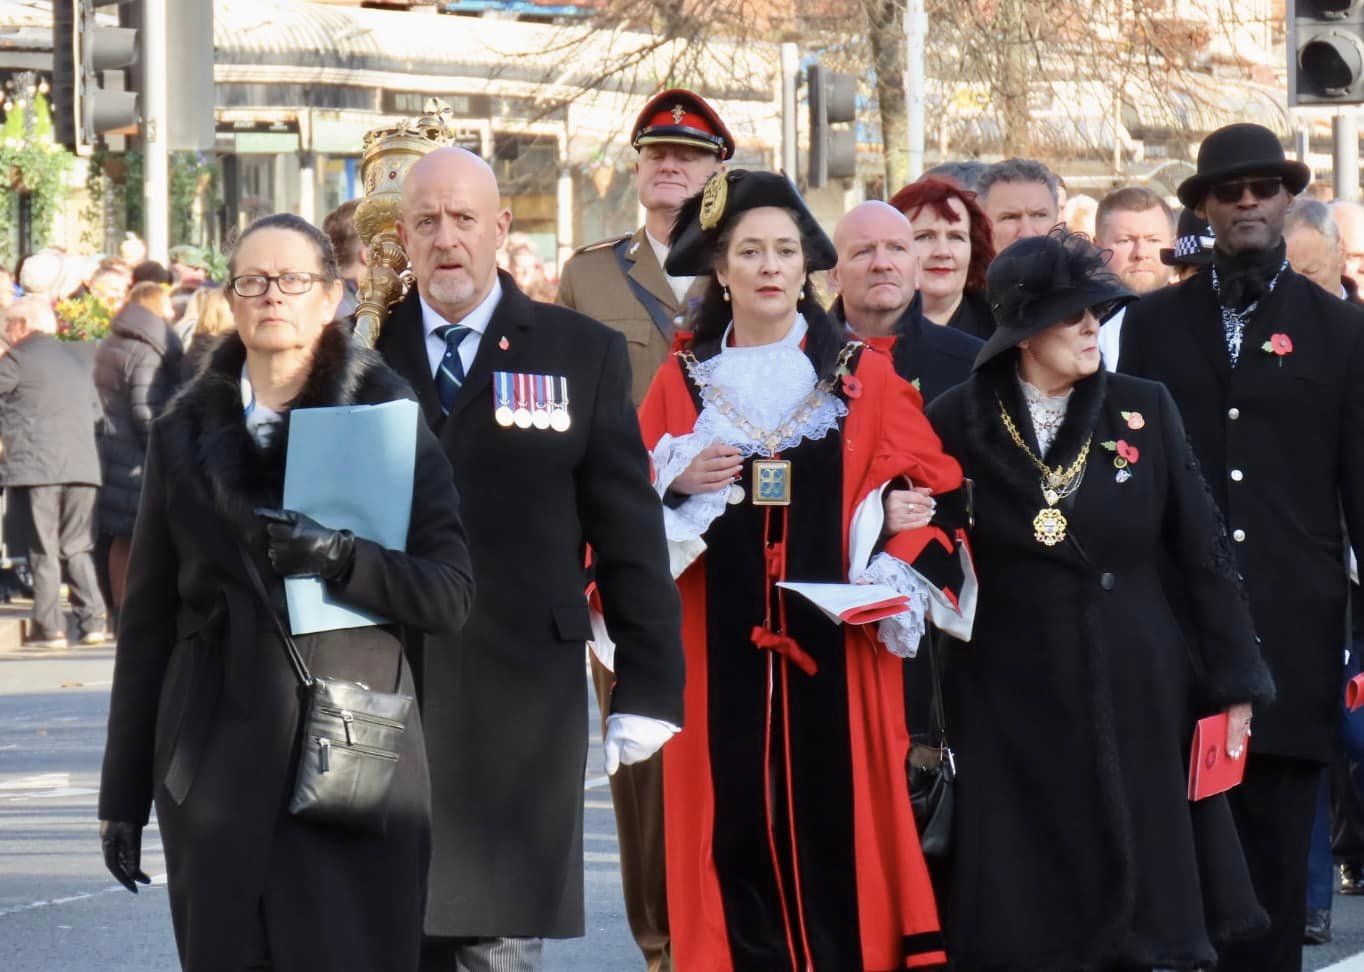 The Remembrance Sunday parade and service in Southport. Mayor of Sefton Cllr Clare Carragher and other dignitaries. Photo by Andrew Brown Media